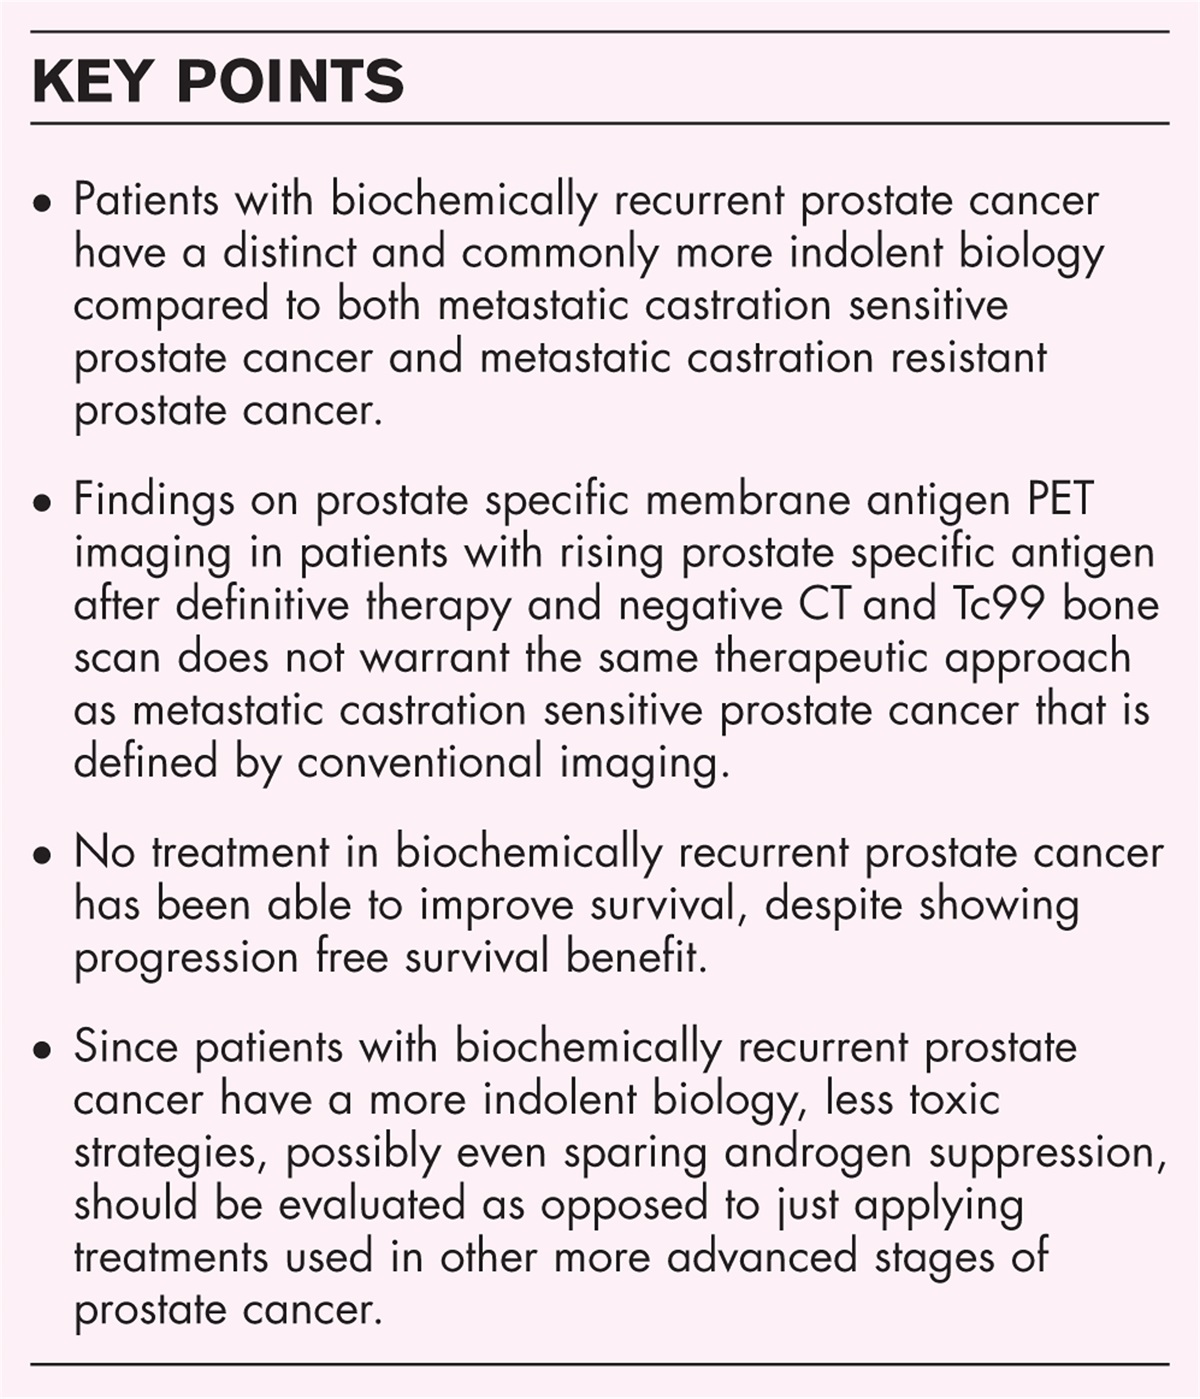 Biochemically recurrent prostate cancer in the era of EMBARK and PSMA PET imaging: everything has changed, except the patients